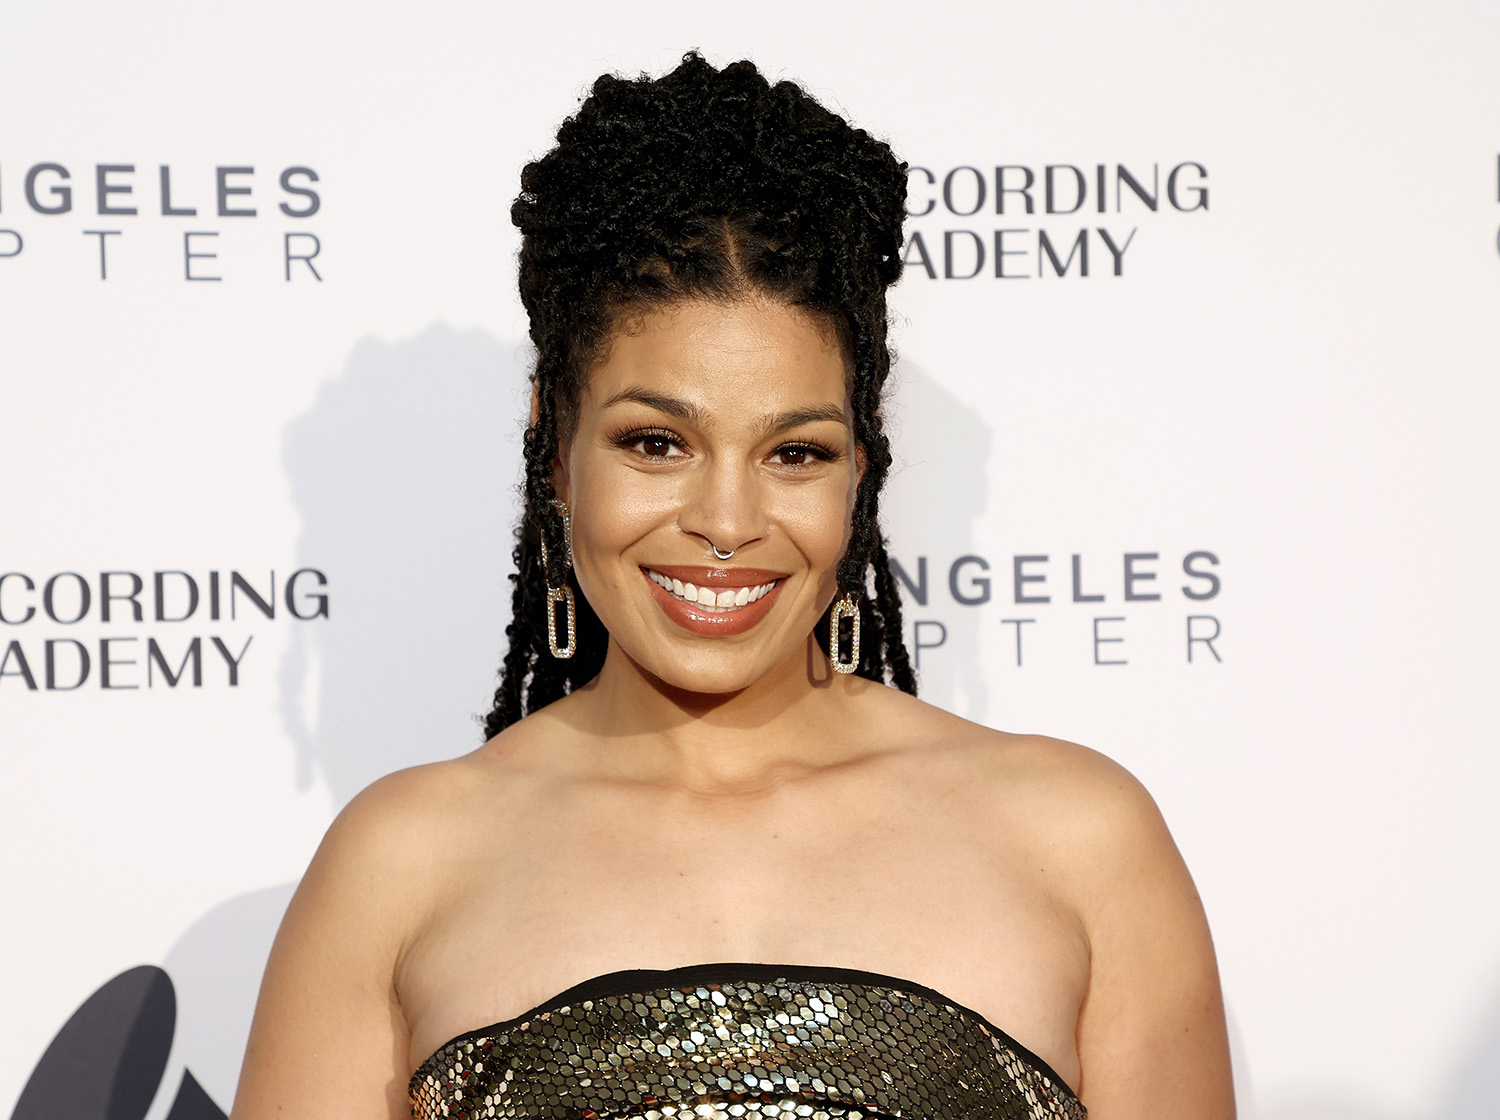 American Idol winner Jordin Sparks, who will return to the series 16 years after her audition.